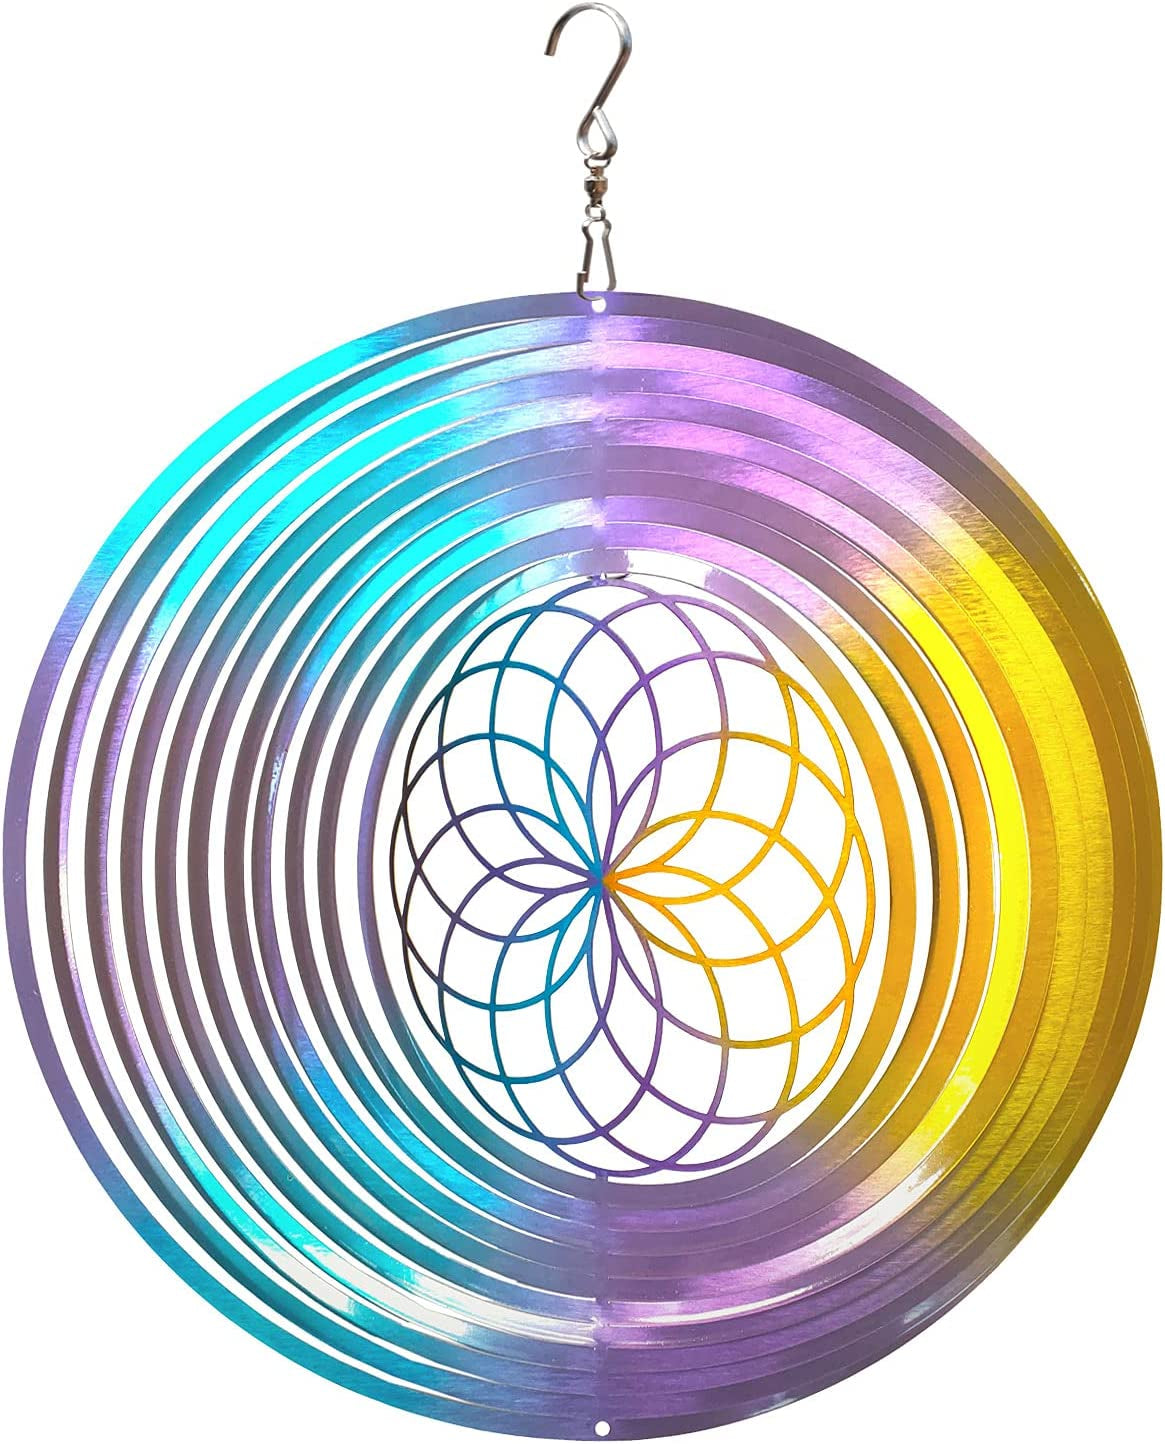  Tree of Life 6inch 3D Stainless Steel Laser Cut Metal Art Geometric Pattern Worth Gift - Hanging Wind Spinner Kinetic Yard Art Decorations - Indoor/Outdoor Décor